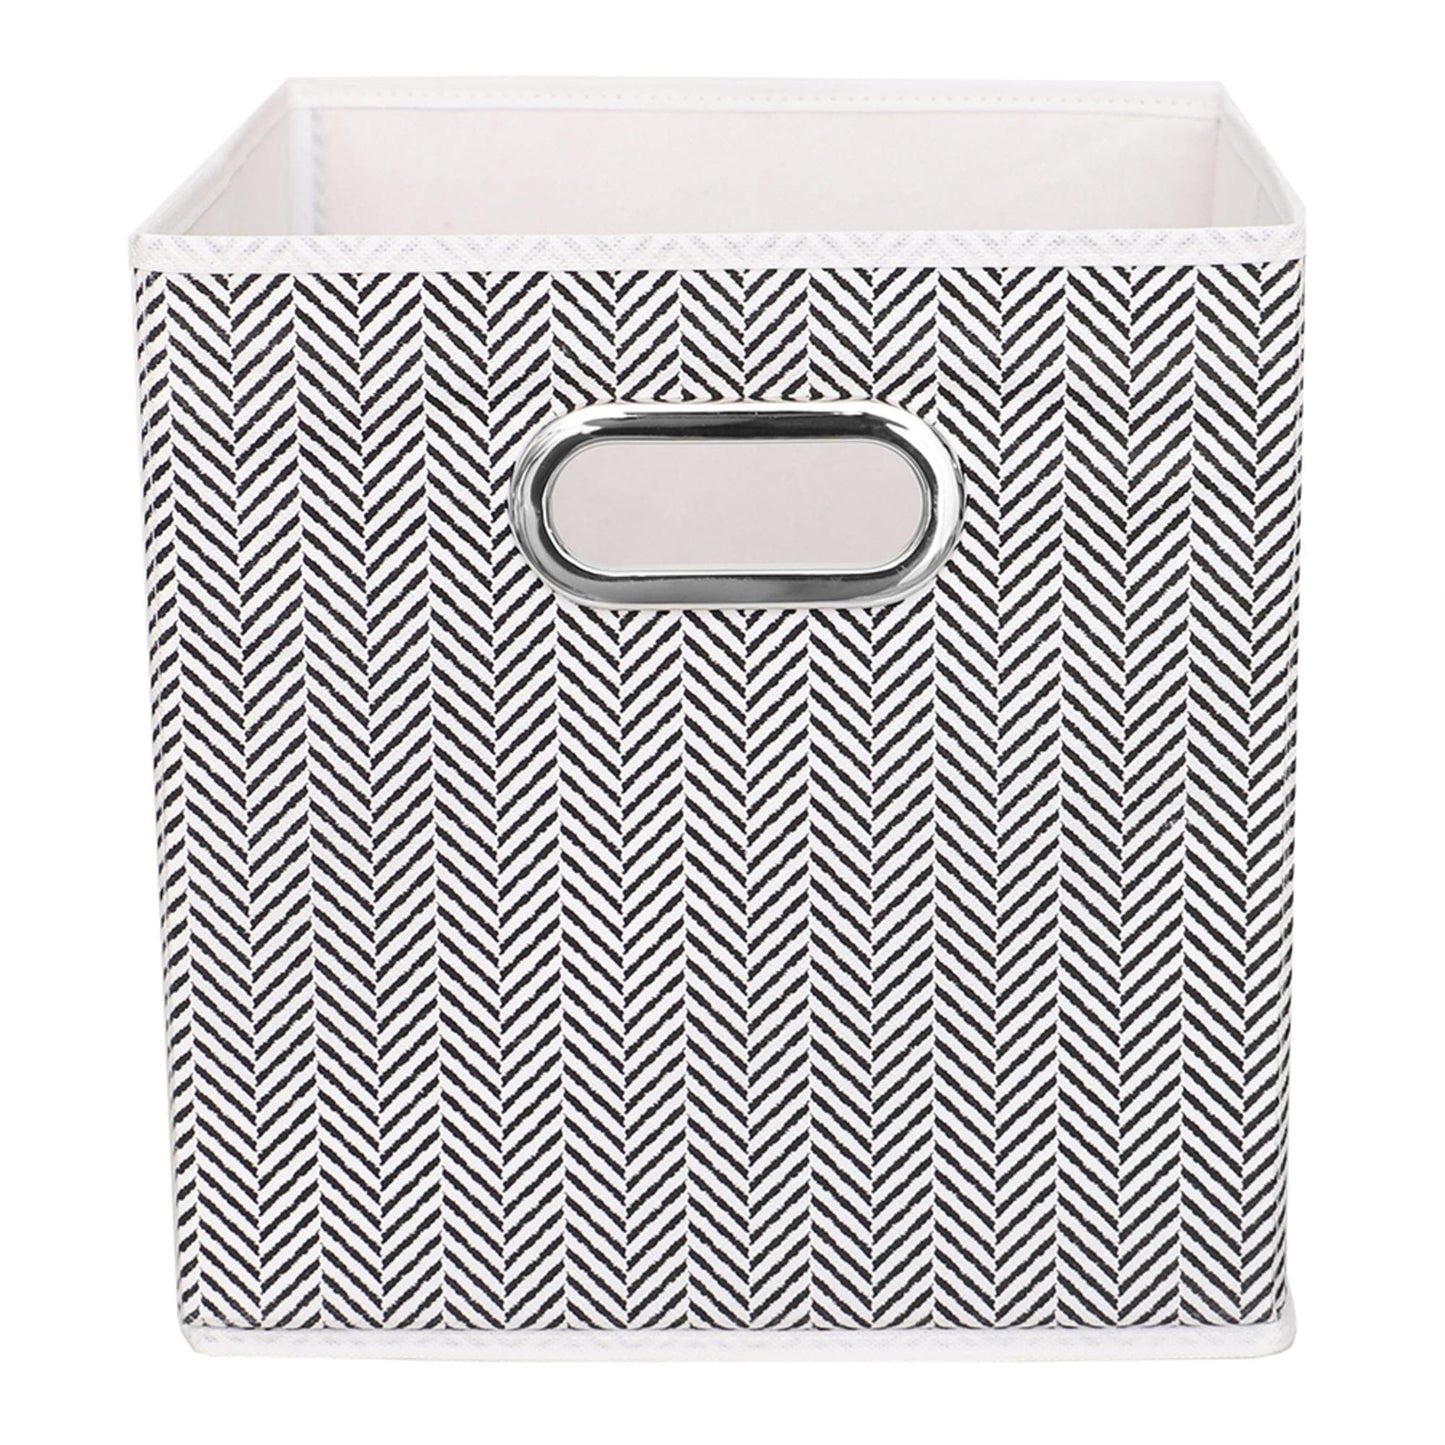 Herring Weave Collapsible Non-Woven Storage Bin with Grommet Handle, Black